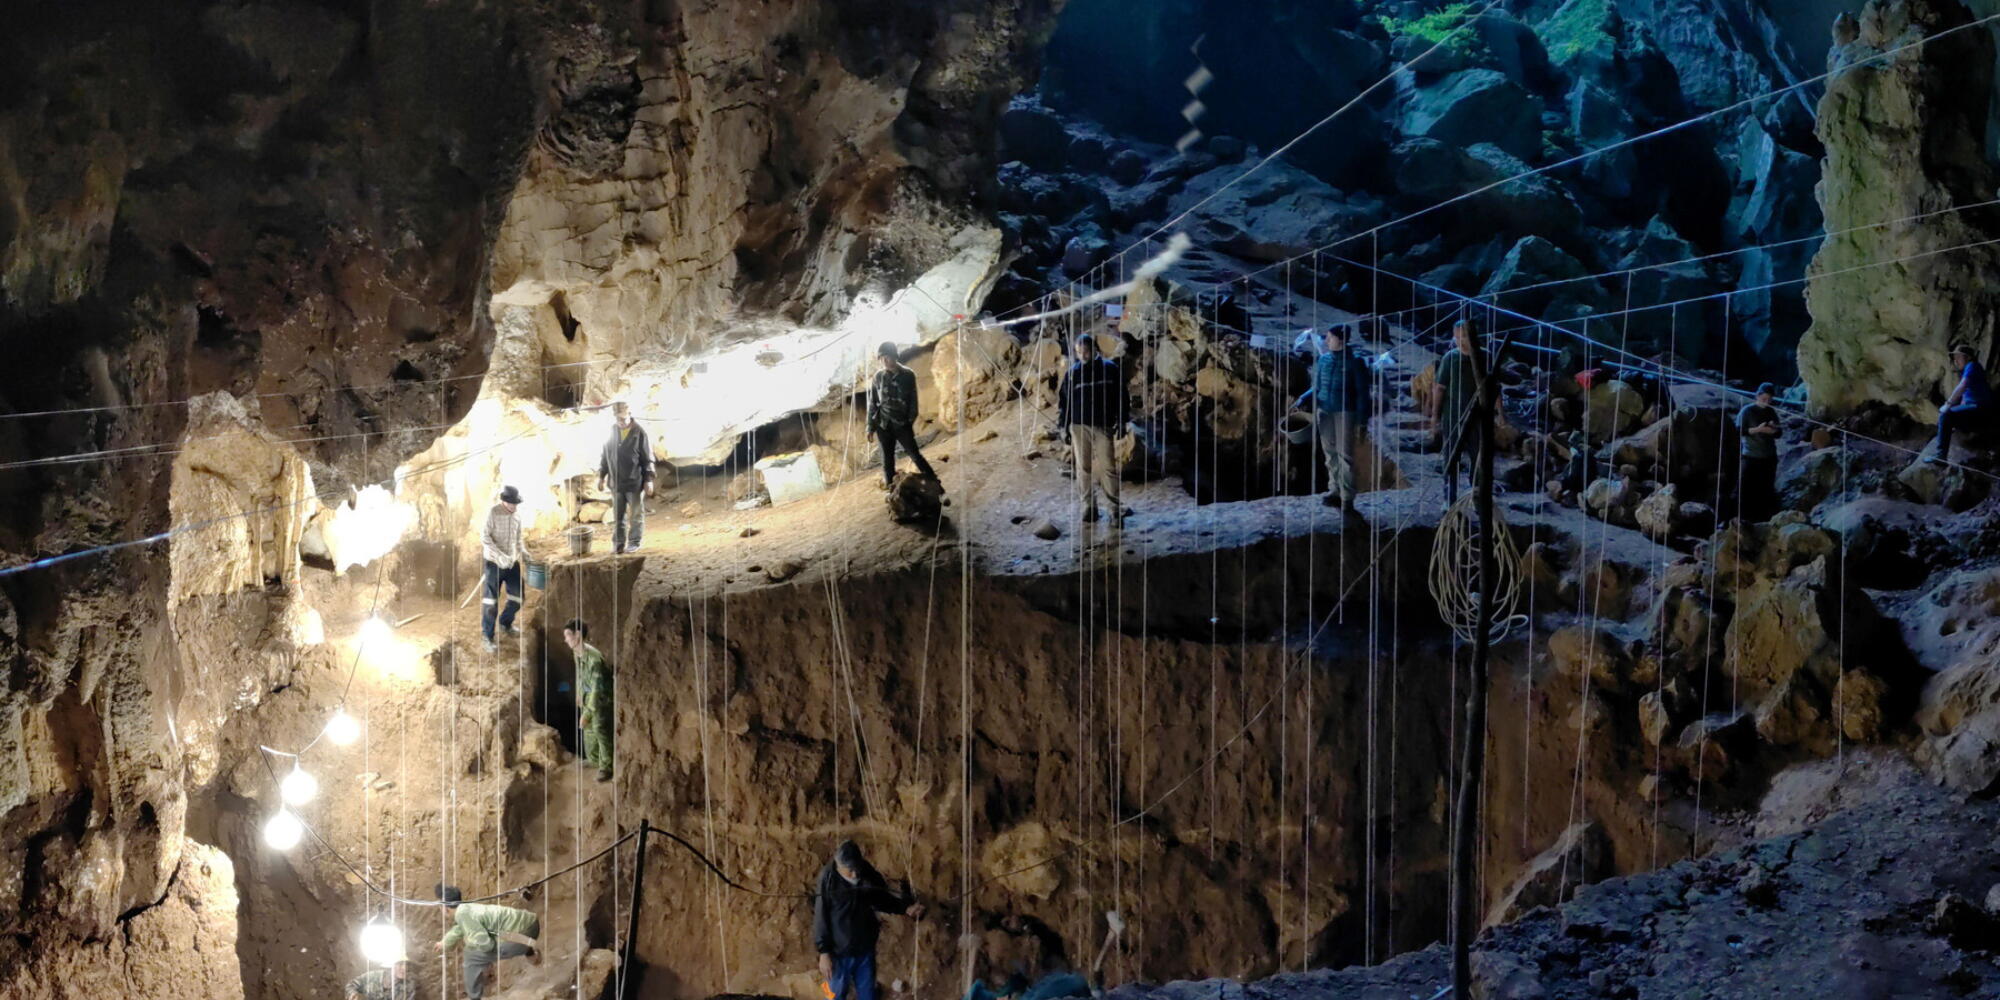  The team excavated through layers of sediments and bones that gradually washed into the cave and were left untouched for tens of thousands of years.  Photo by Fabrice Demeter